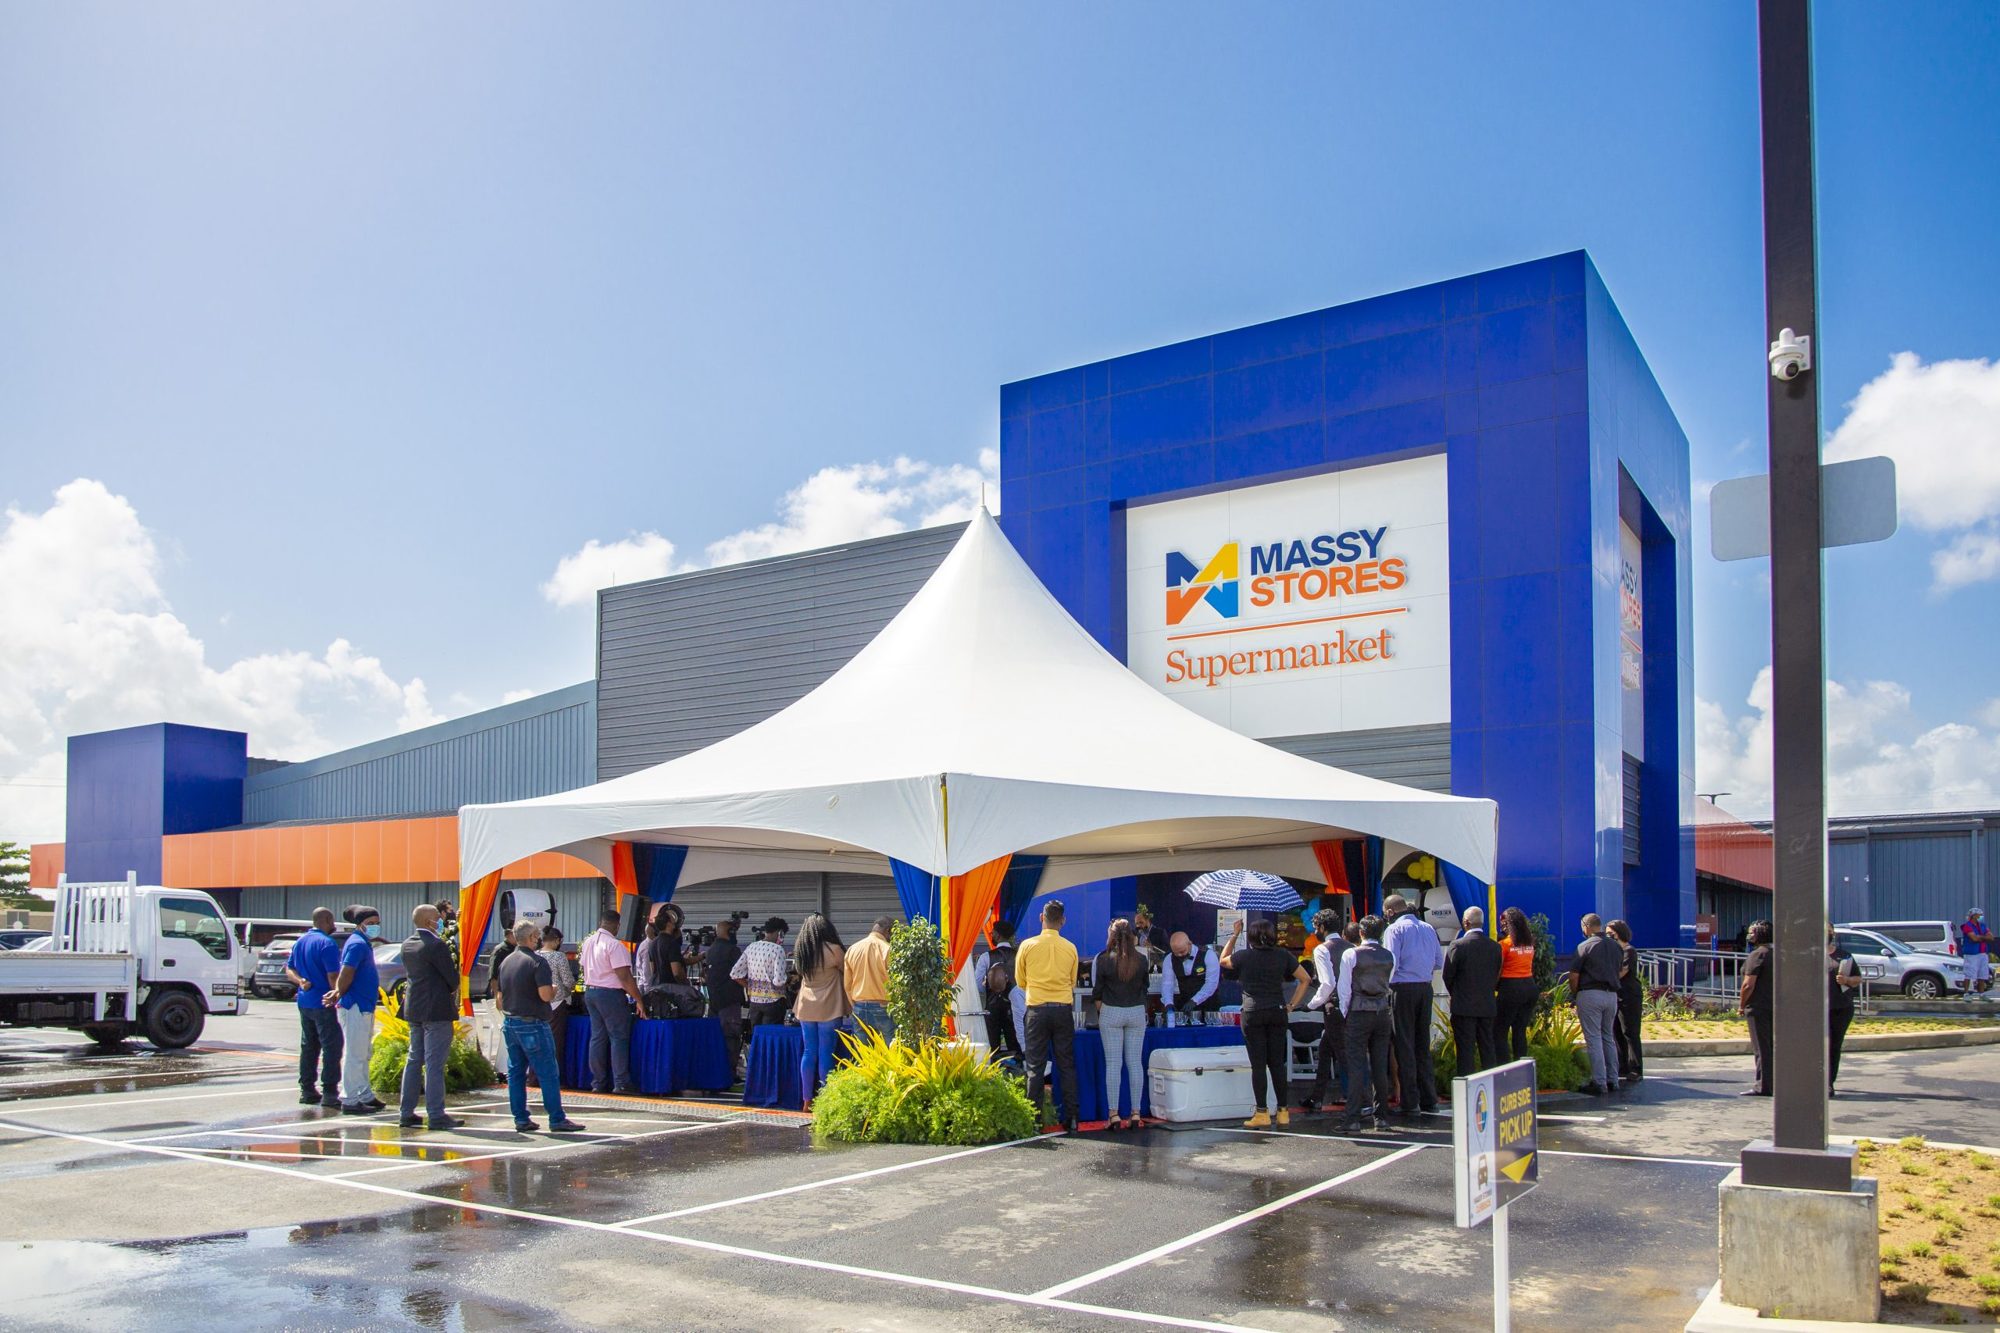 The Massy Stores Supermarket in Brentwood, Chaguanas, in Trinidad and Tobago .